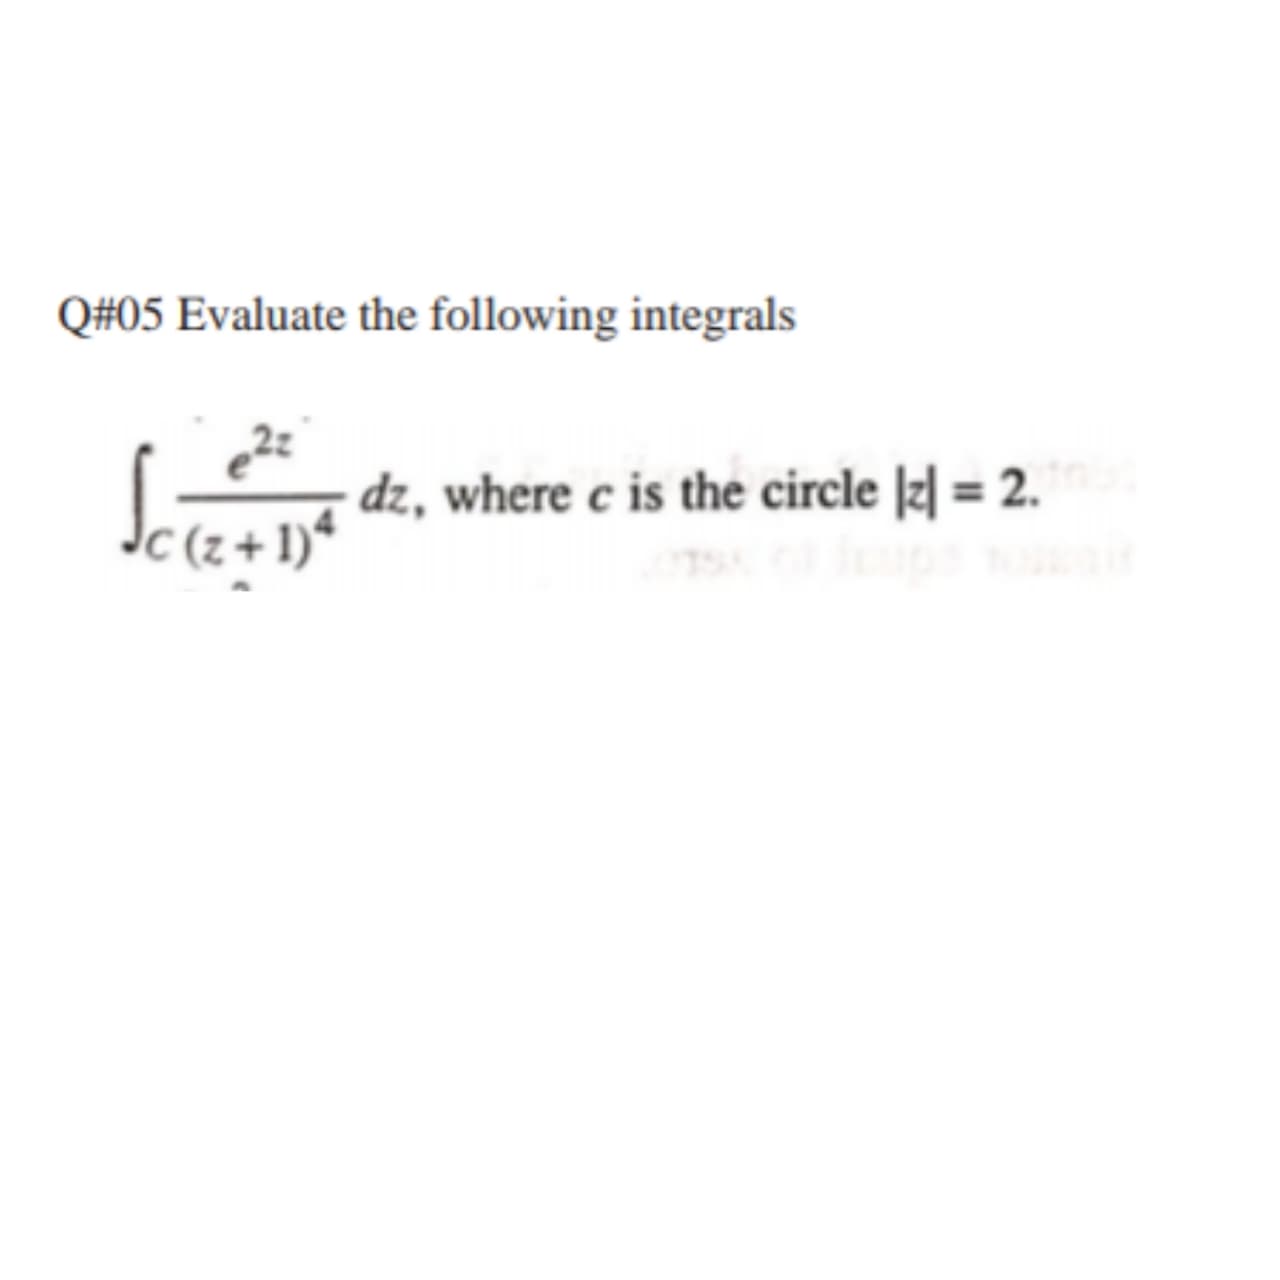 Q#05 Evaluate the following integrals
dz, where c is the circle
|z| = 2.
C(z+ 1)*
